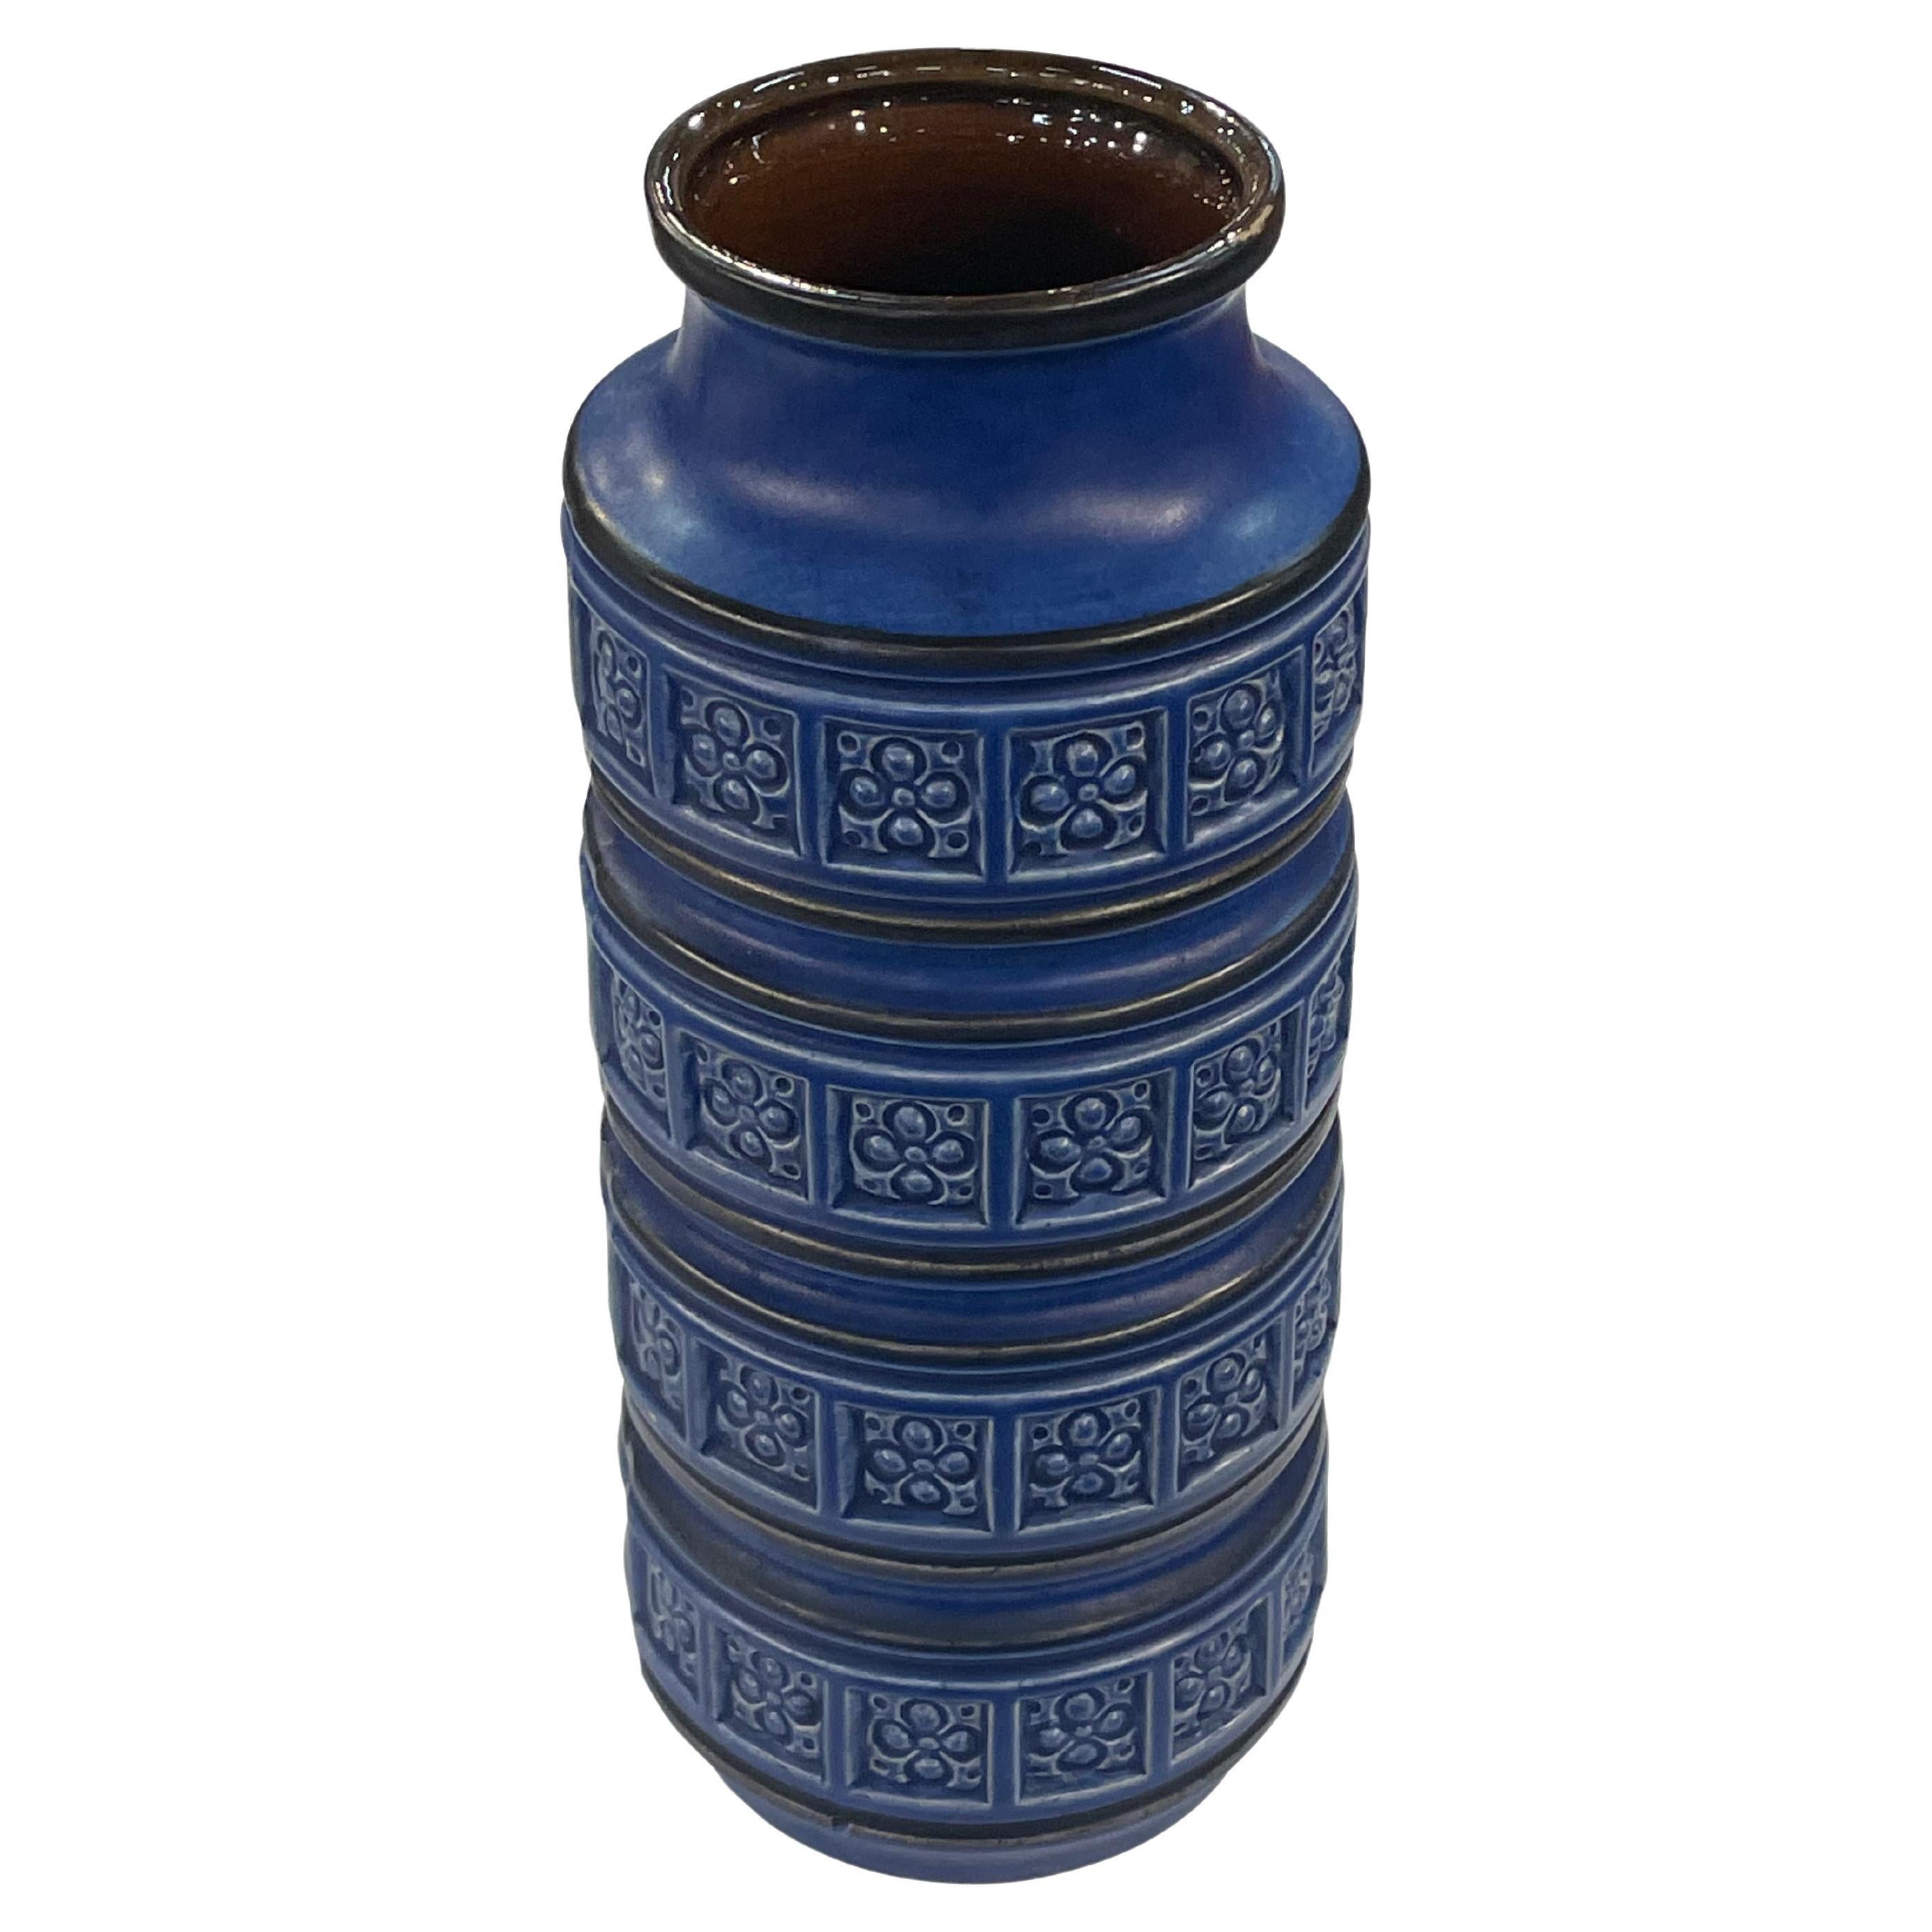 Cobalt Blue With Geometric Textured Bands Vase, Germany, Mid Century 